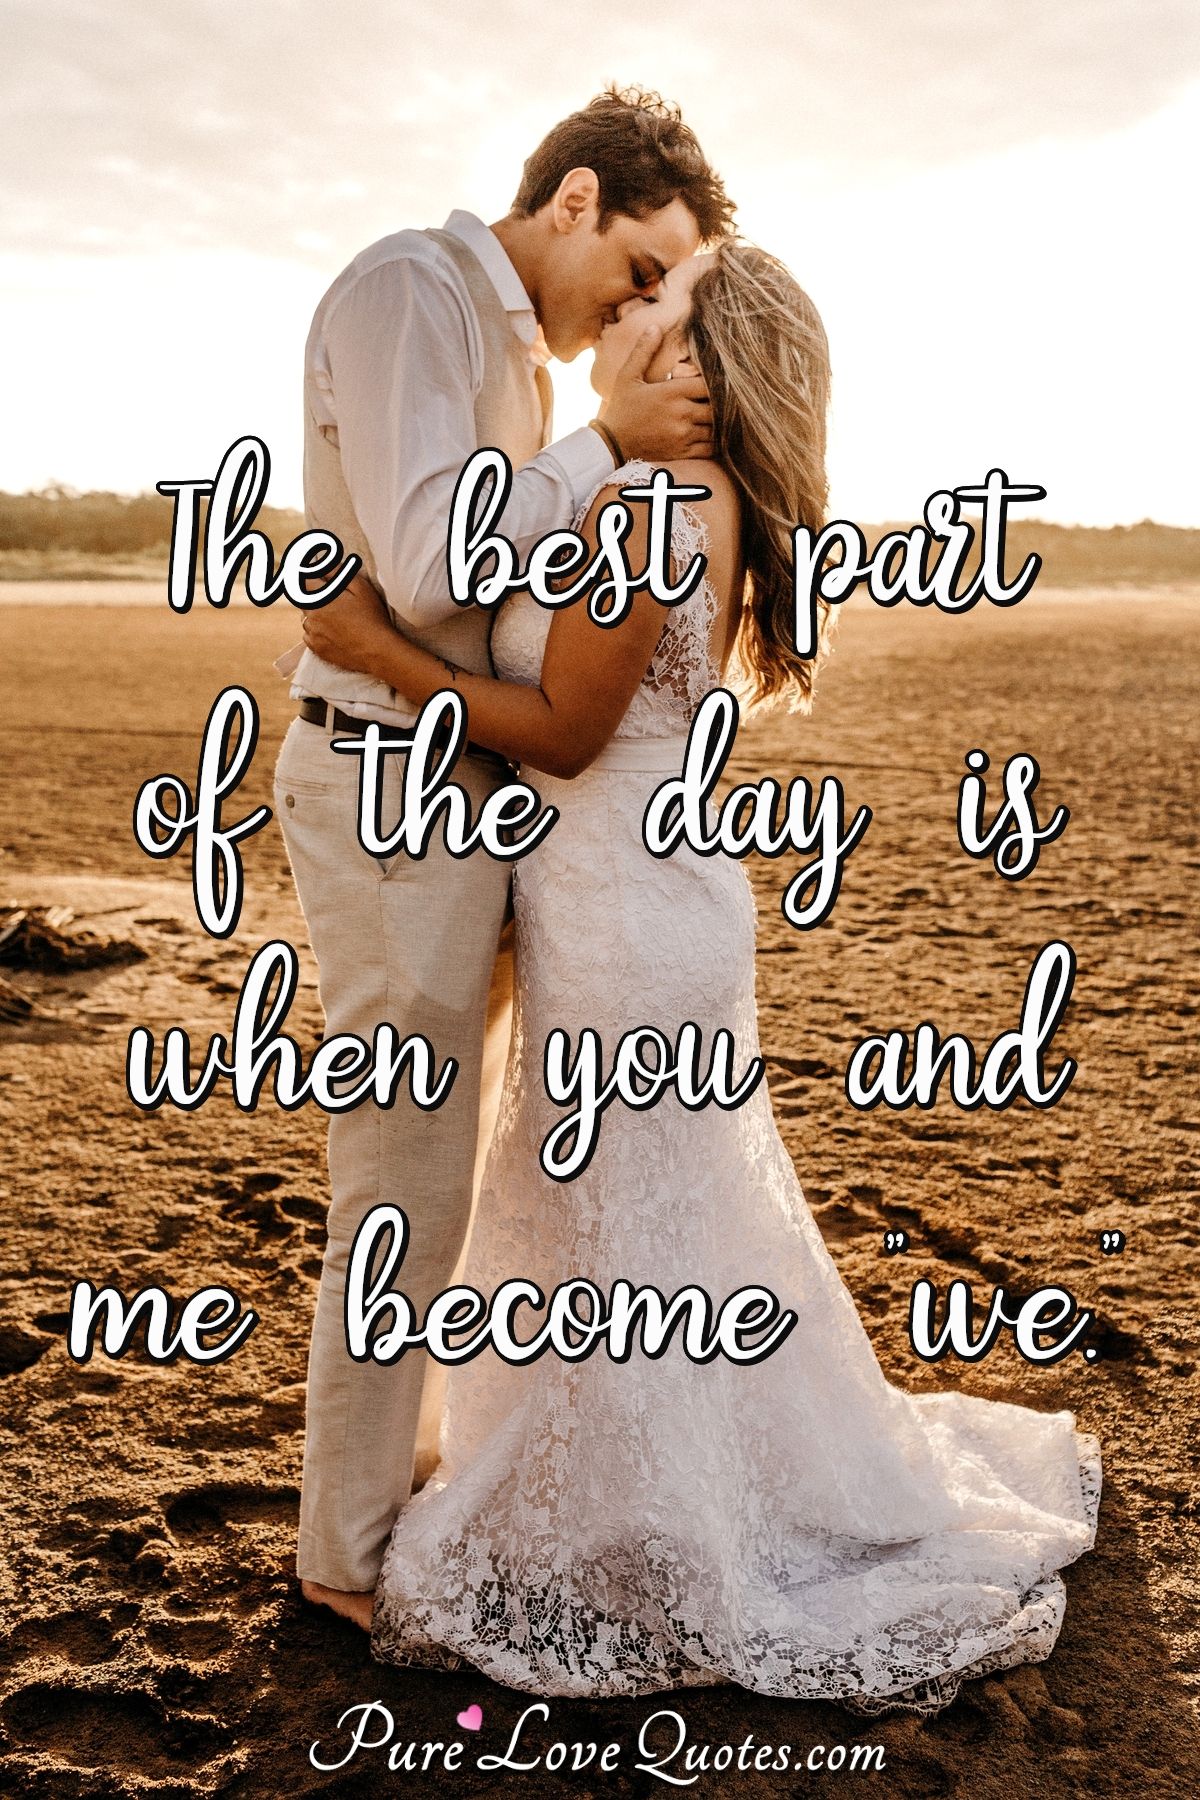 The best part of the day is when you and me become "we." - Anonymous